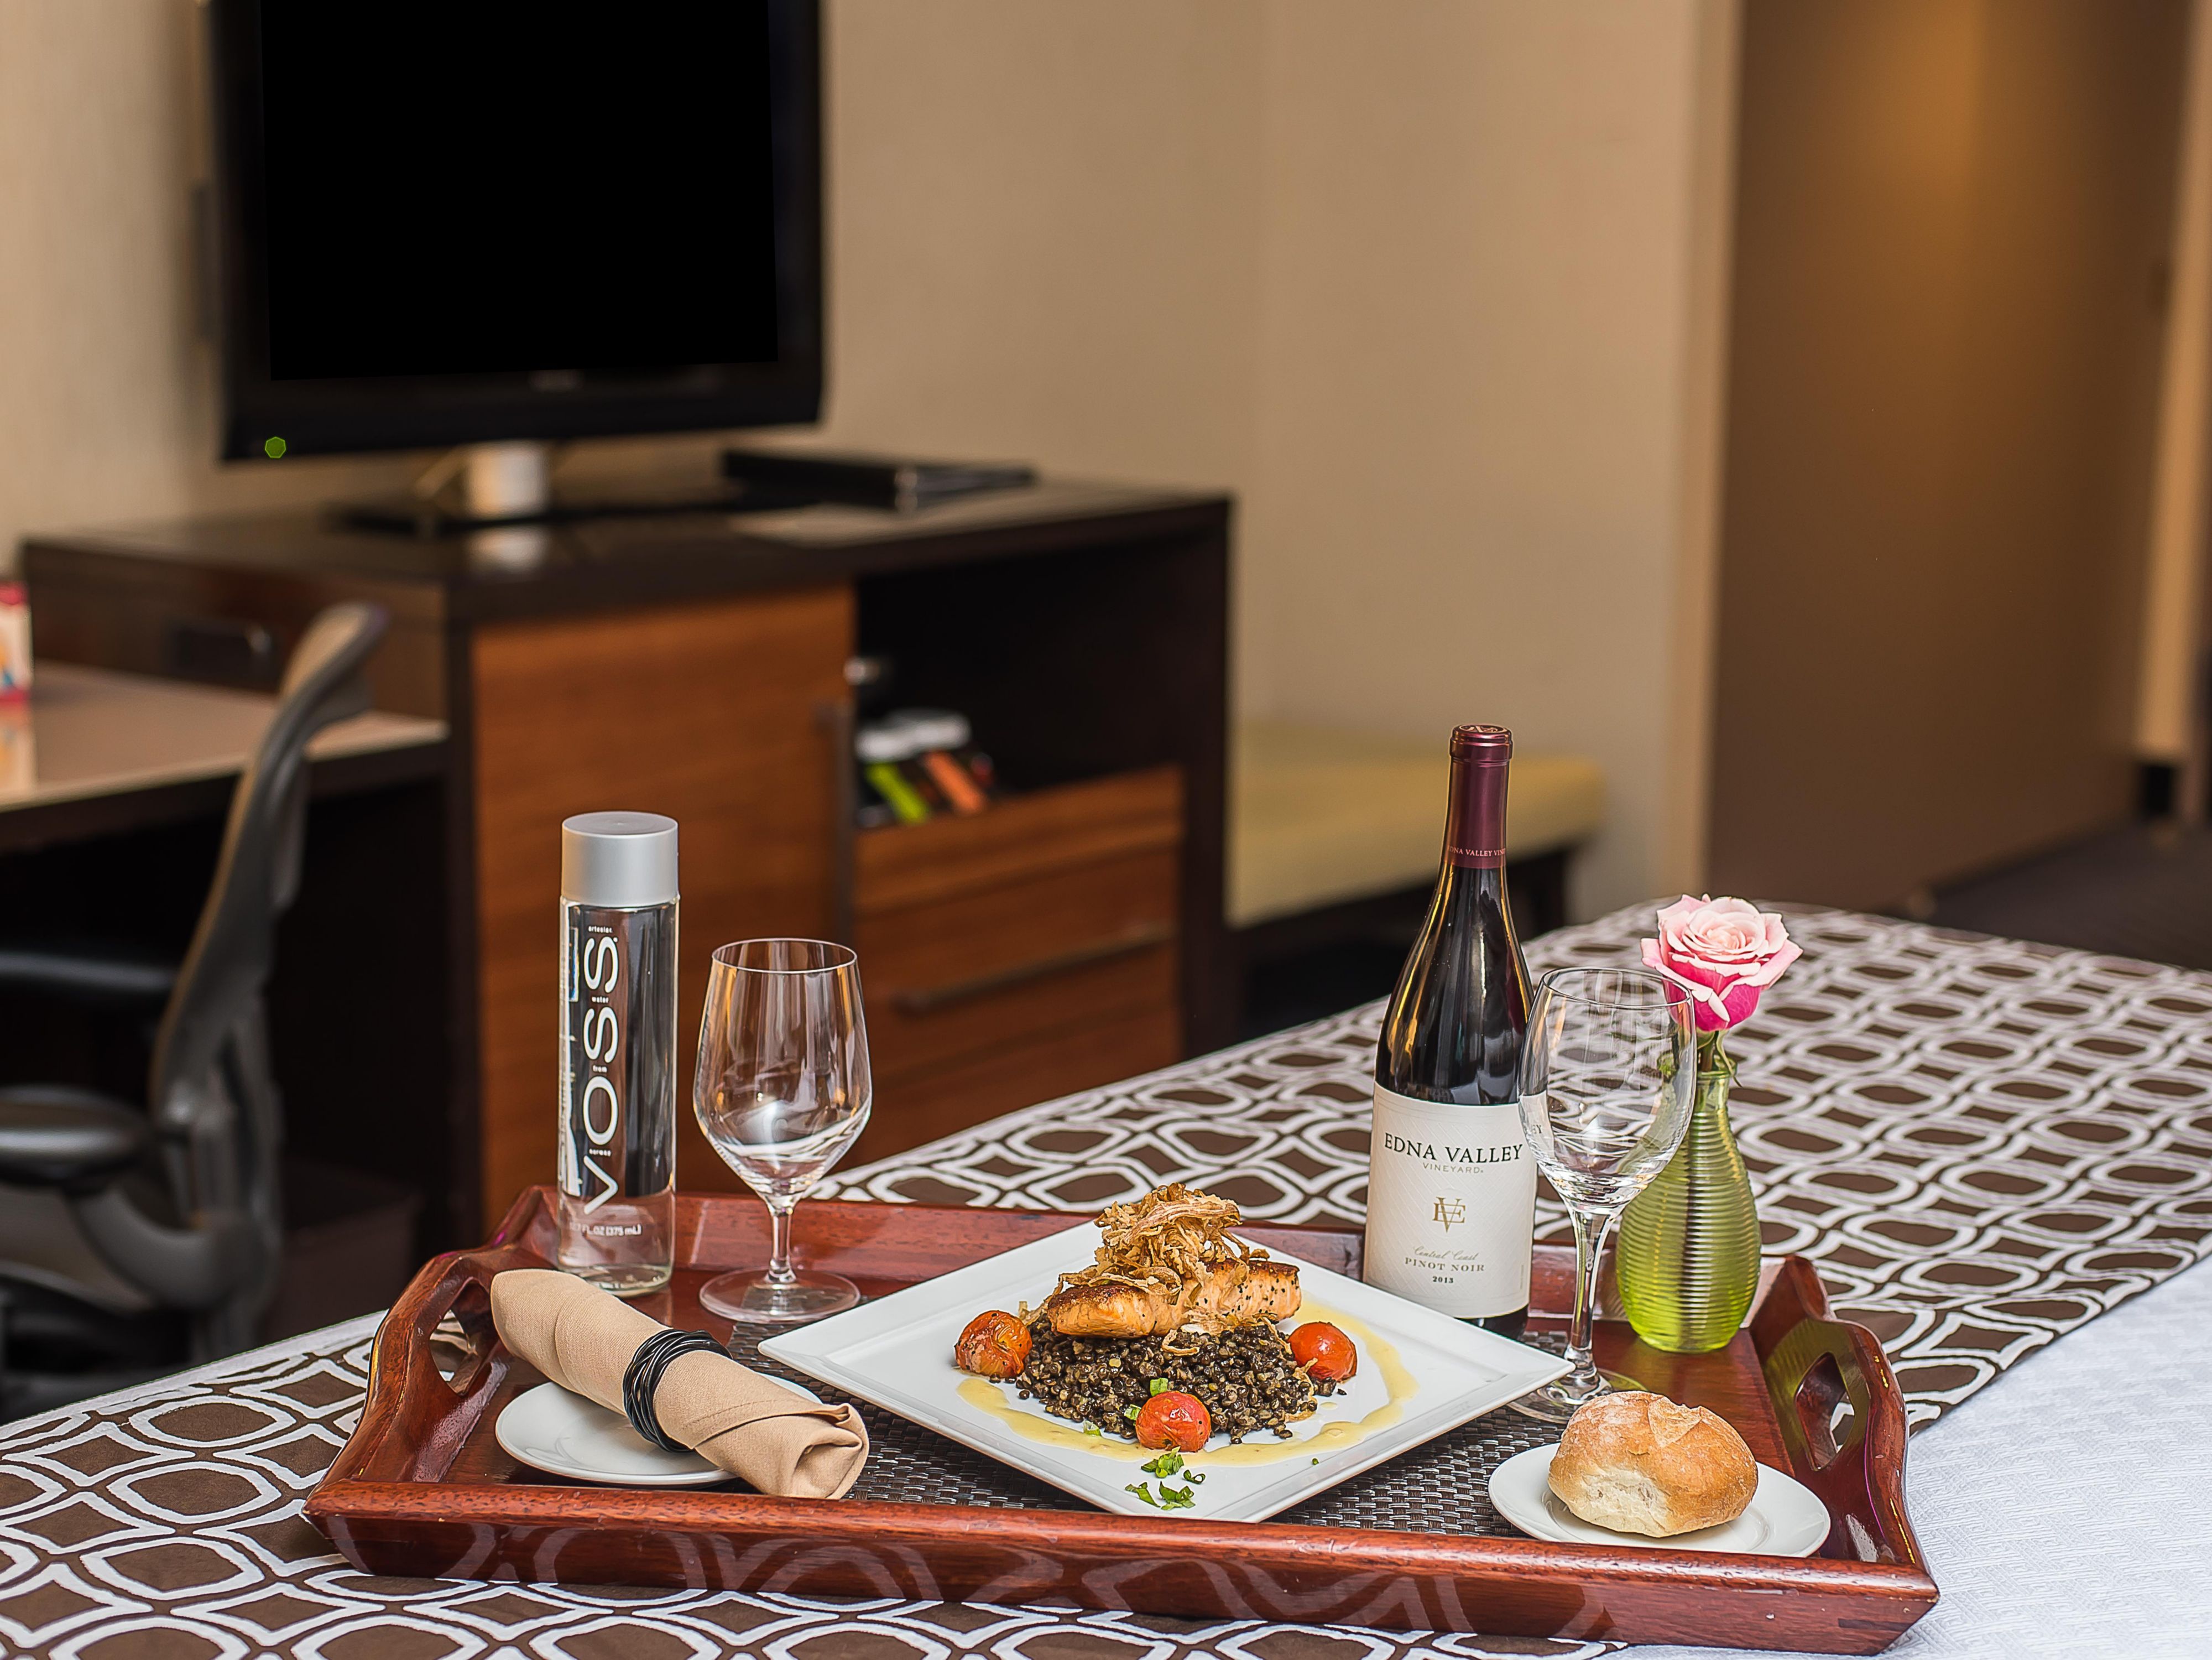 Enjoy an In Room Dining experience